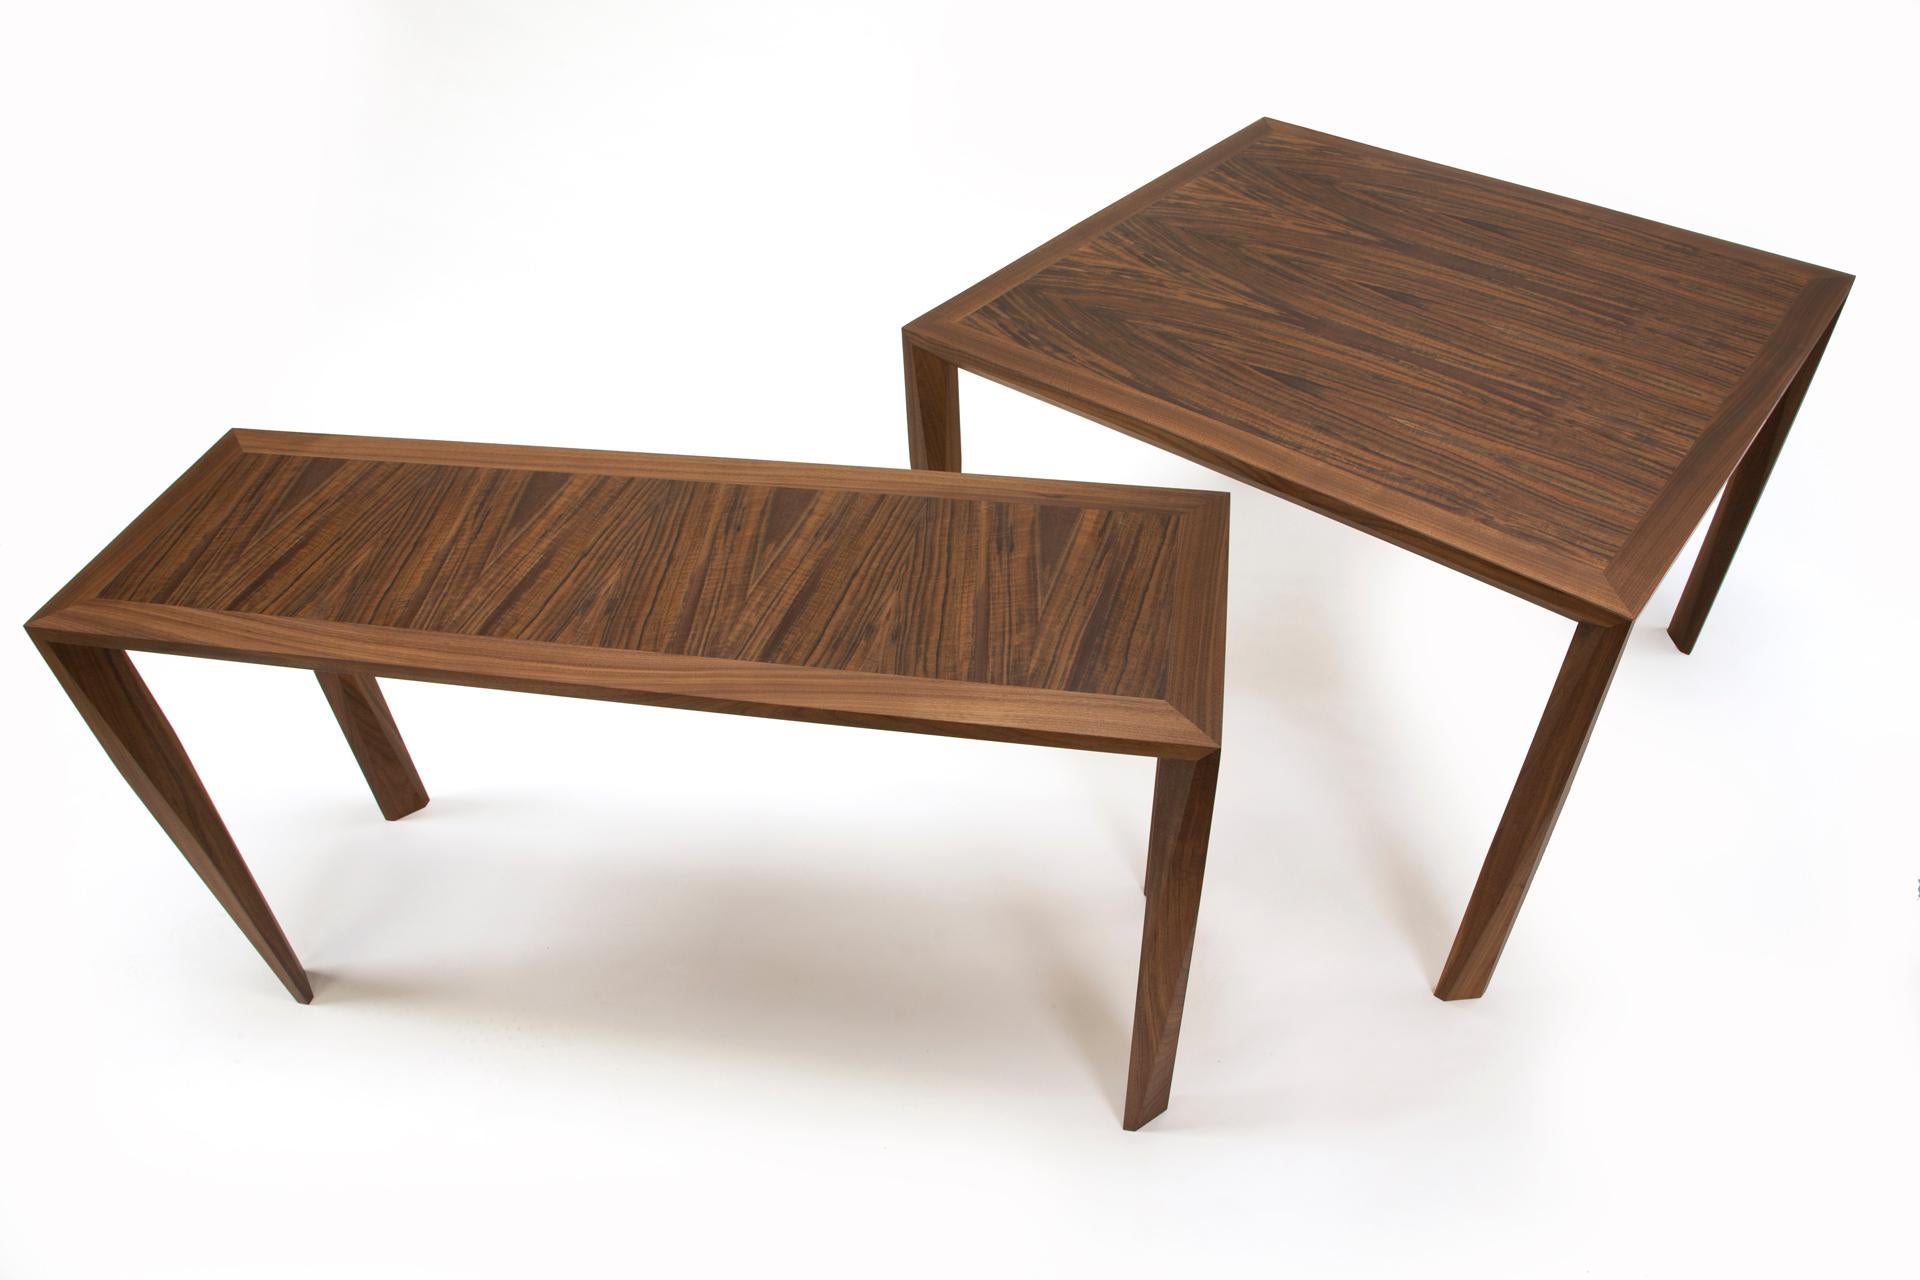 This dining table in our new dining table or console table series is called the 